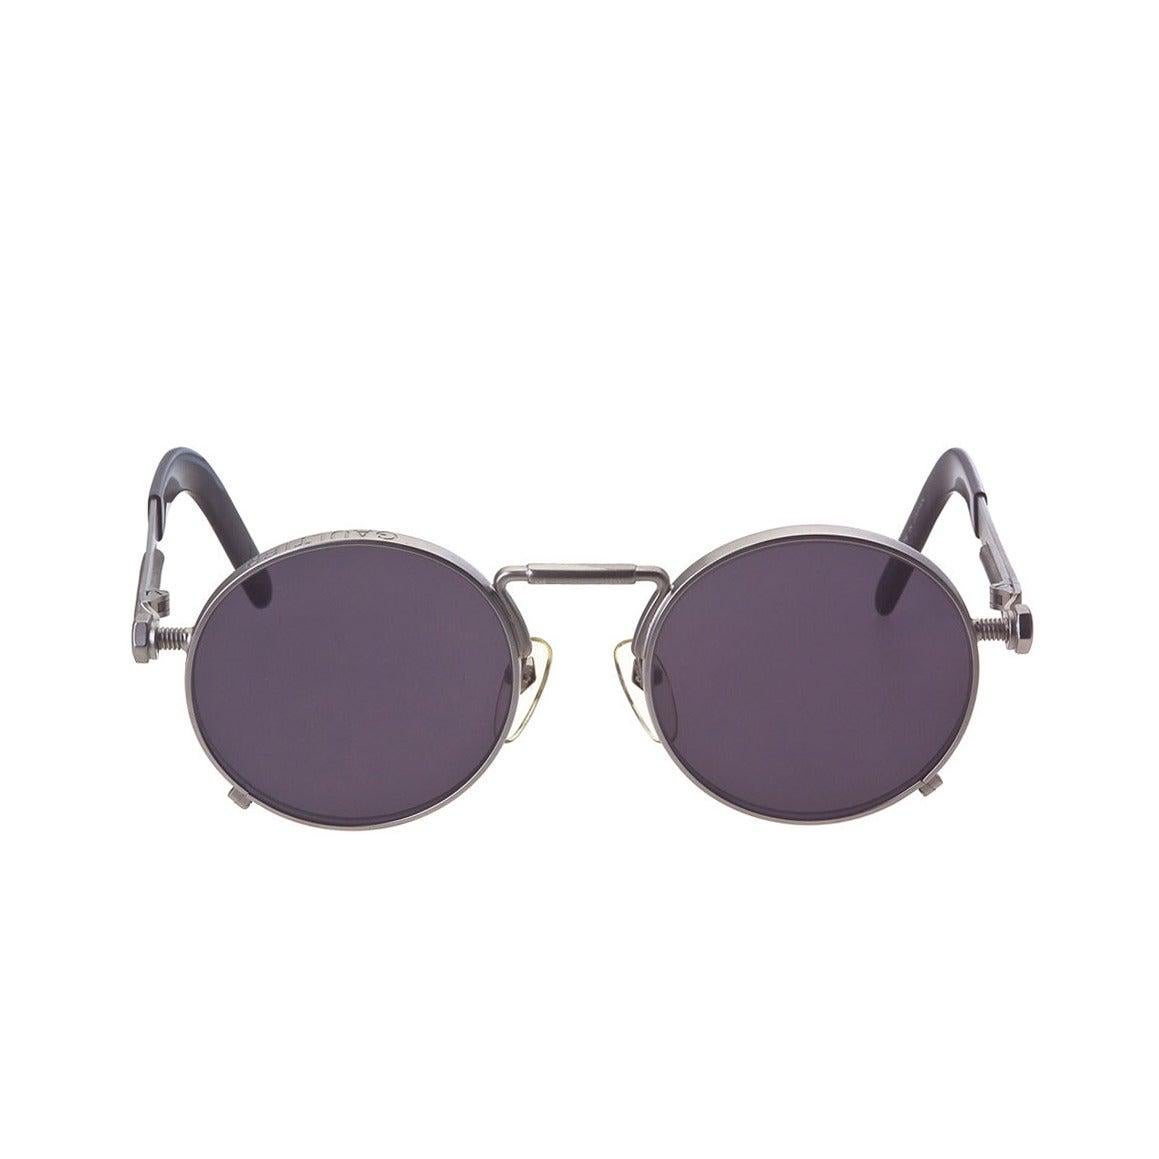 Jean Paul Gaultier 56-8171 Silver Sunglasses In Excellent Condition For Sale In Chicago, IL